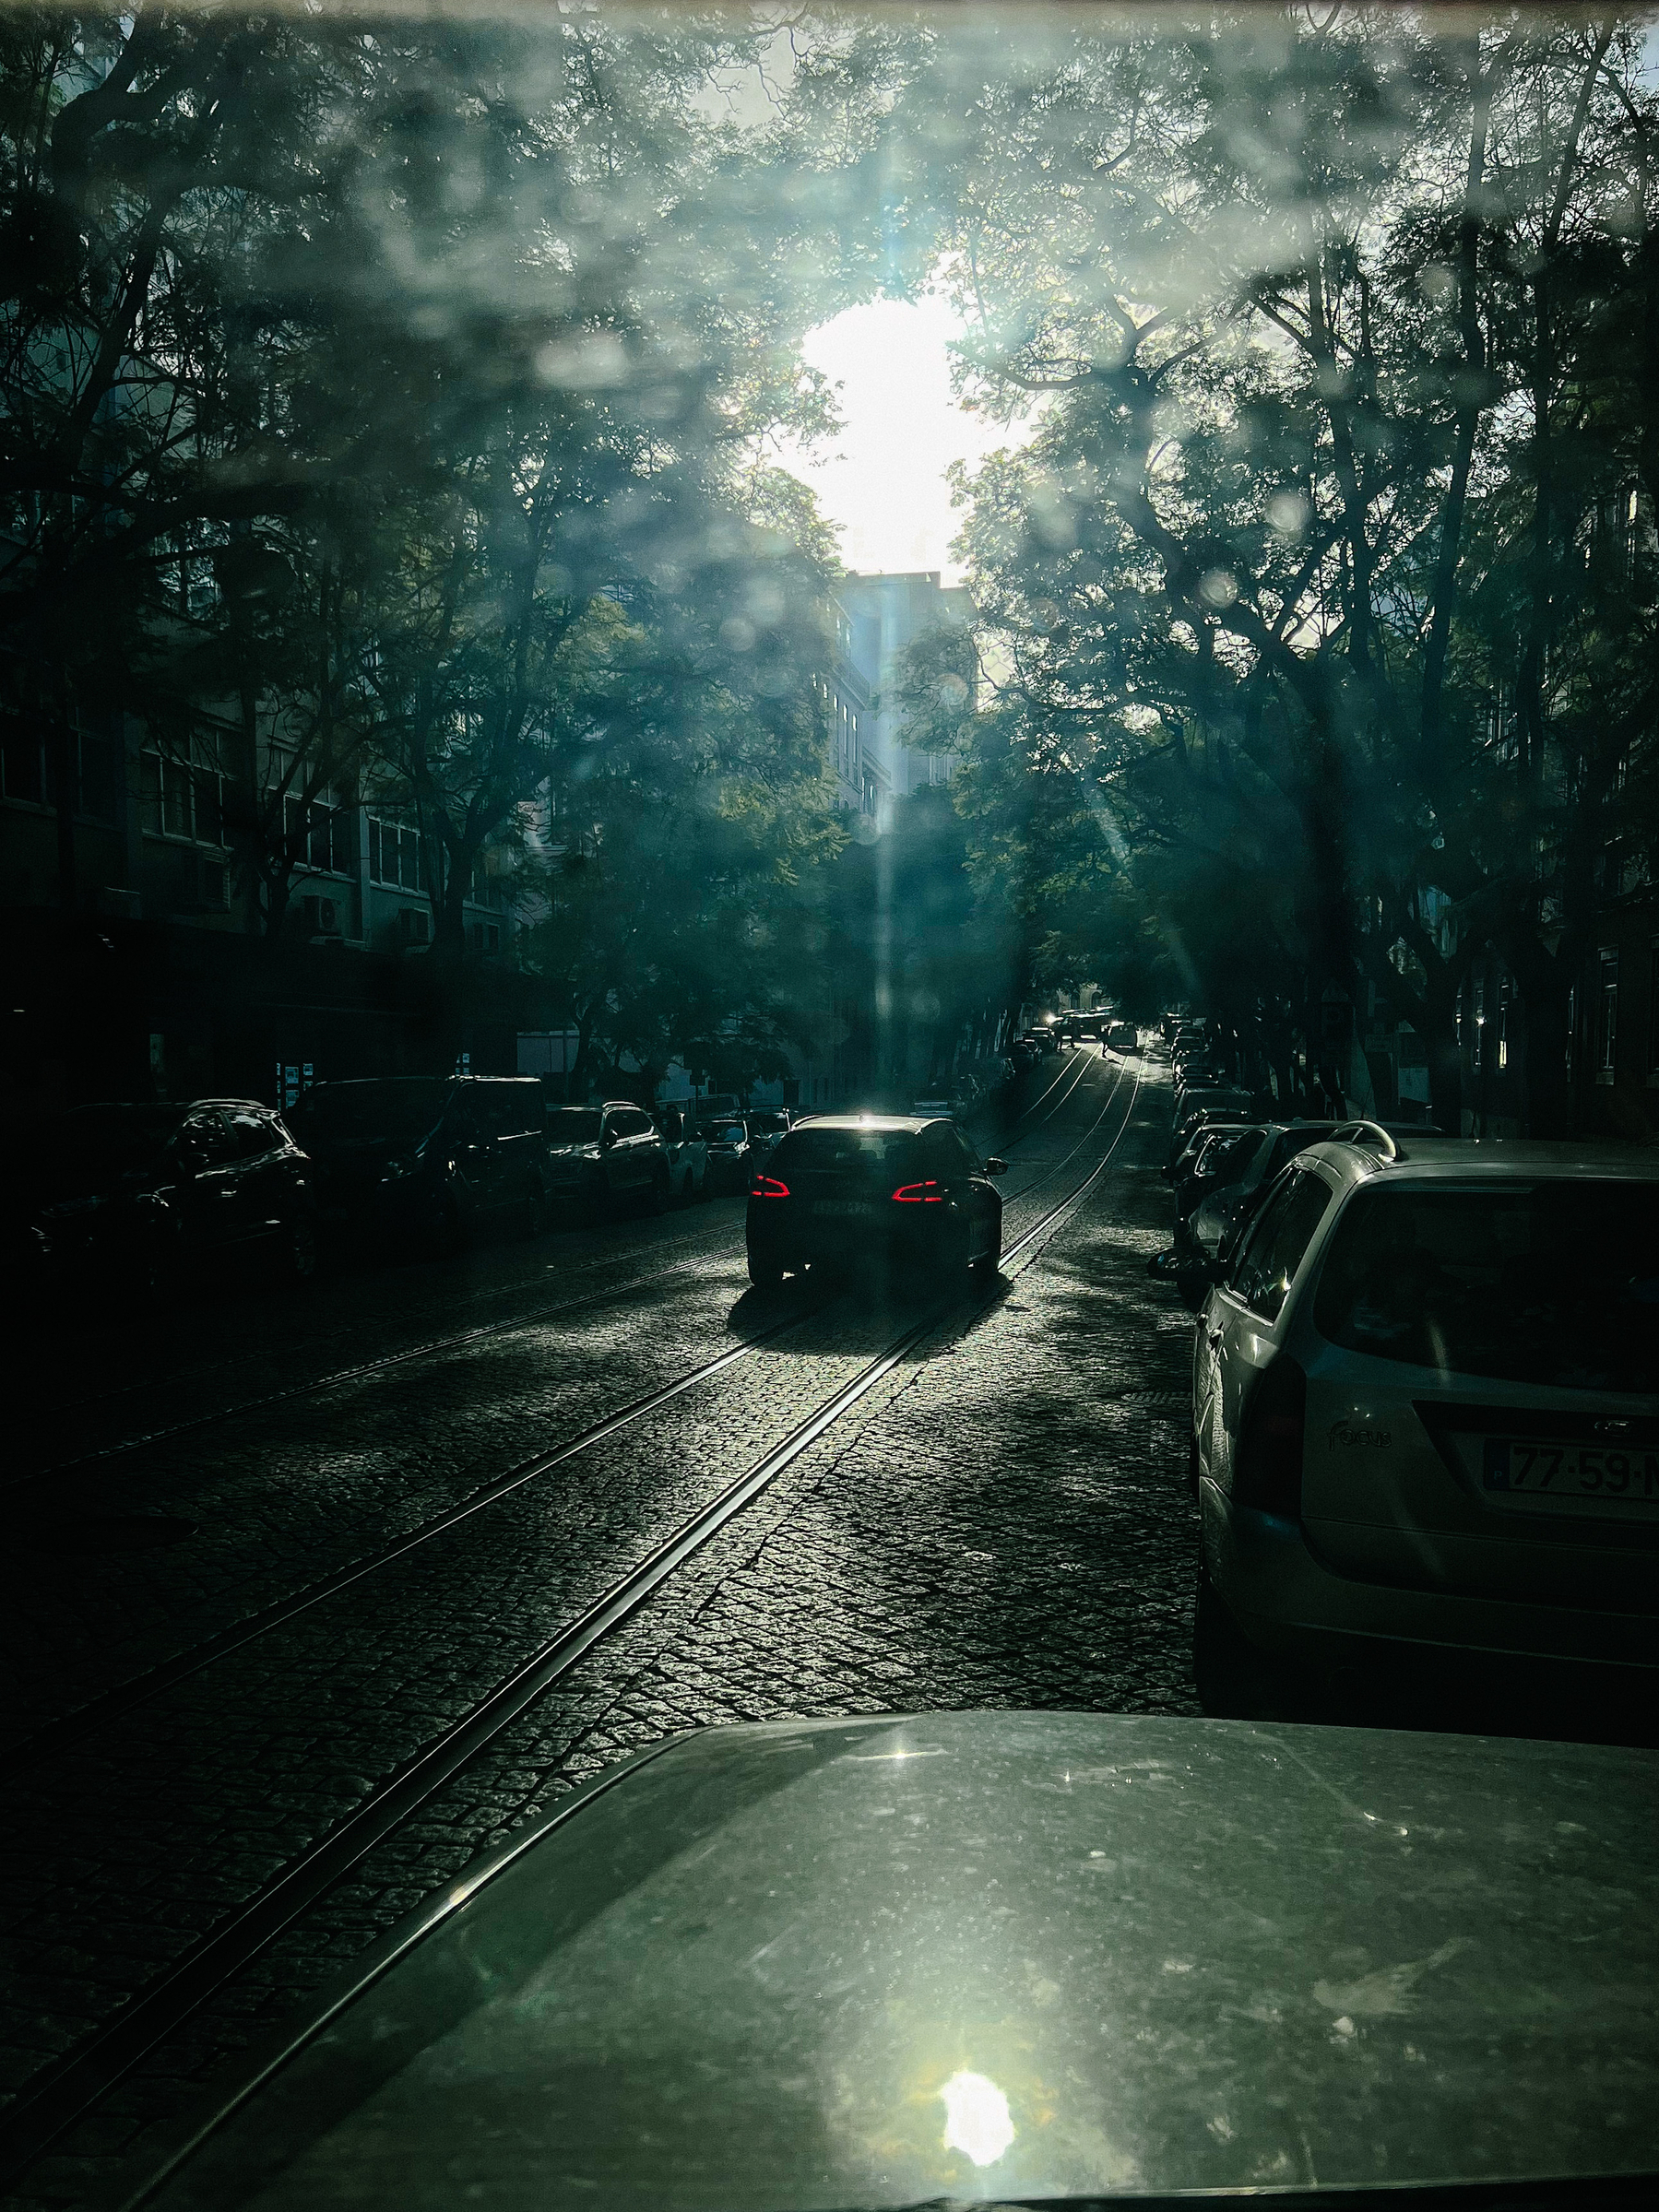 A car is seen driving on a tree lined street, tram tracks on the road. Winter morning light. Shot from inside a car. 